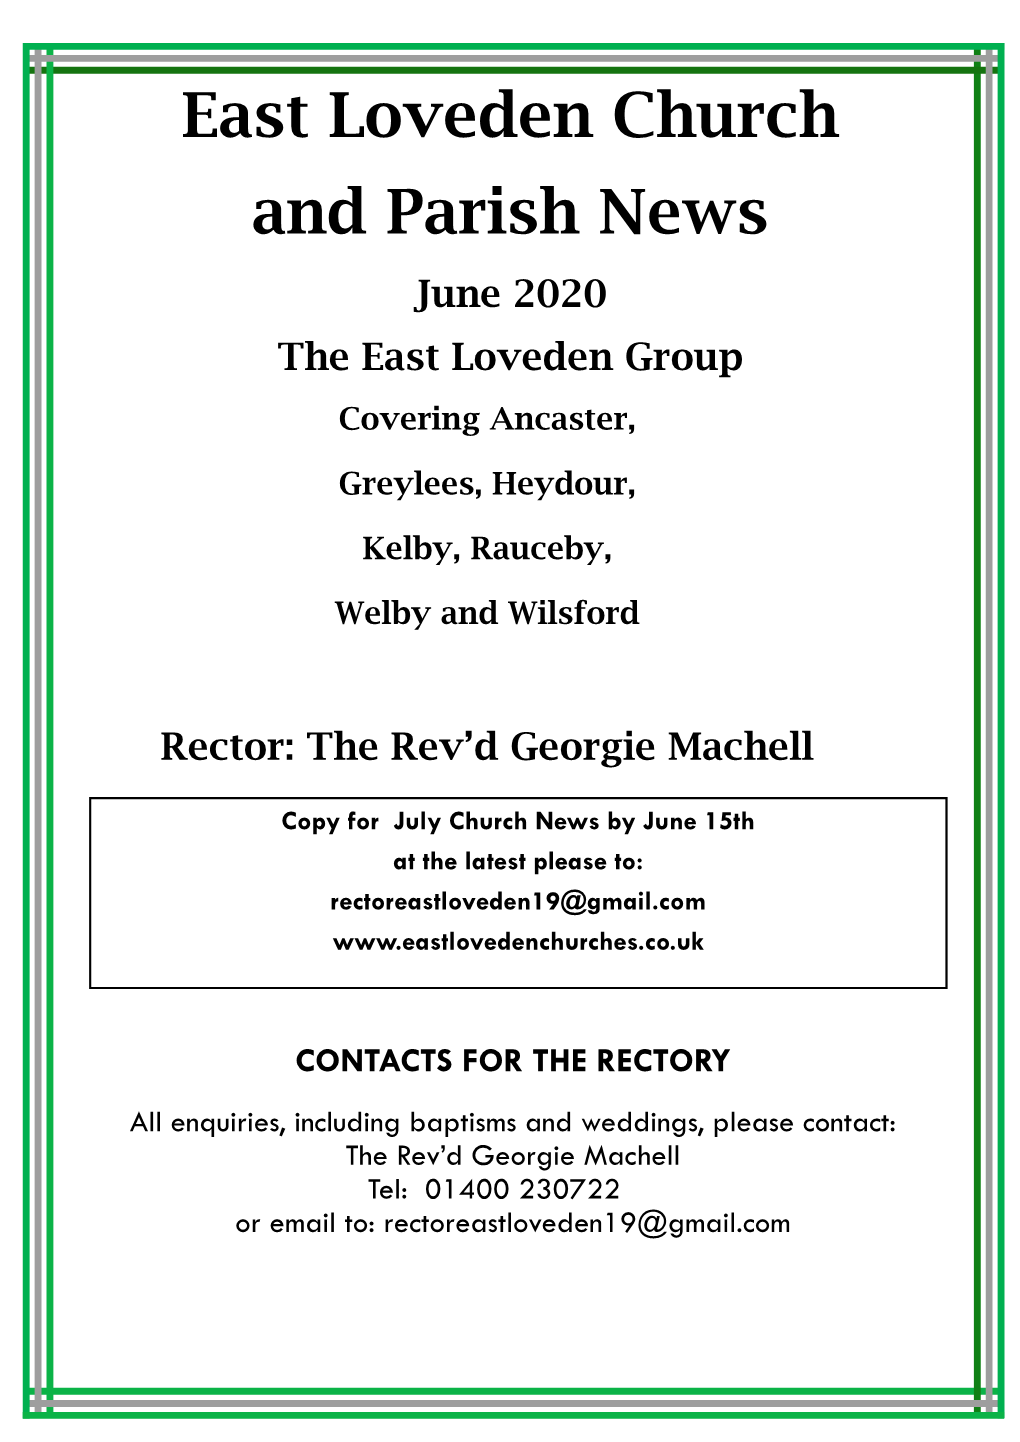 East Loveden Church and Parish News June 2020 the East Loveden Group Covering Ancaster